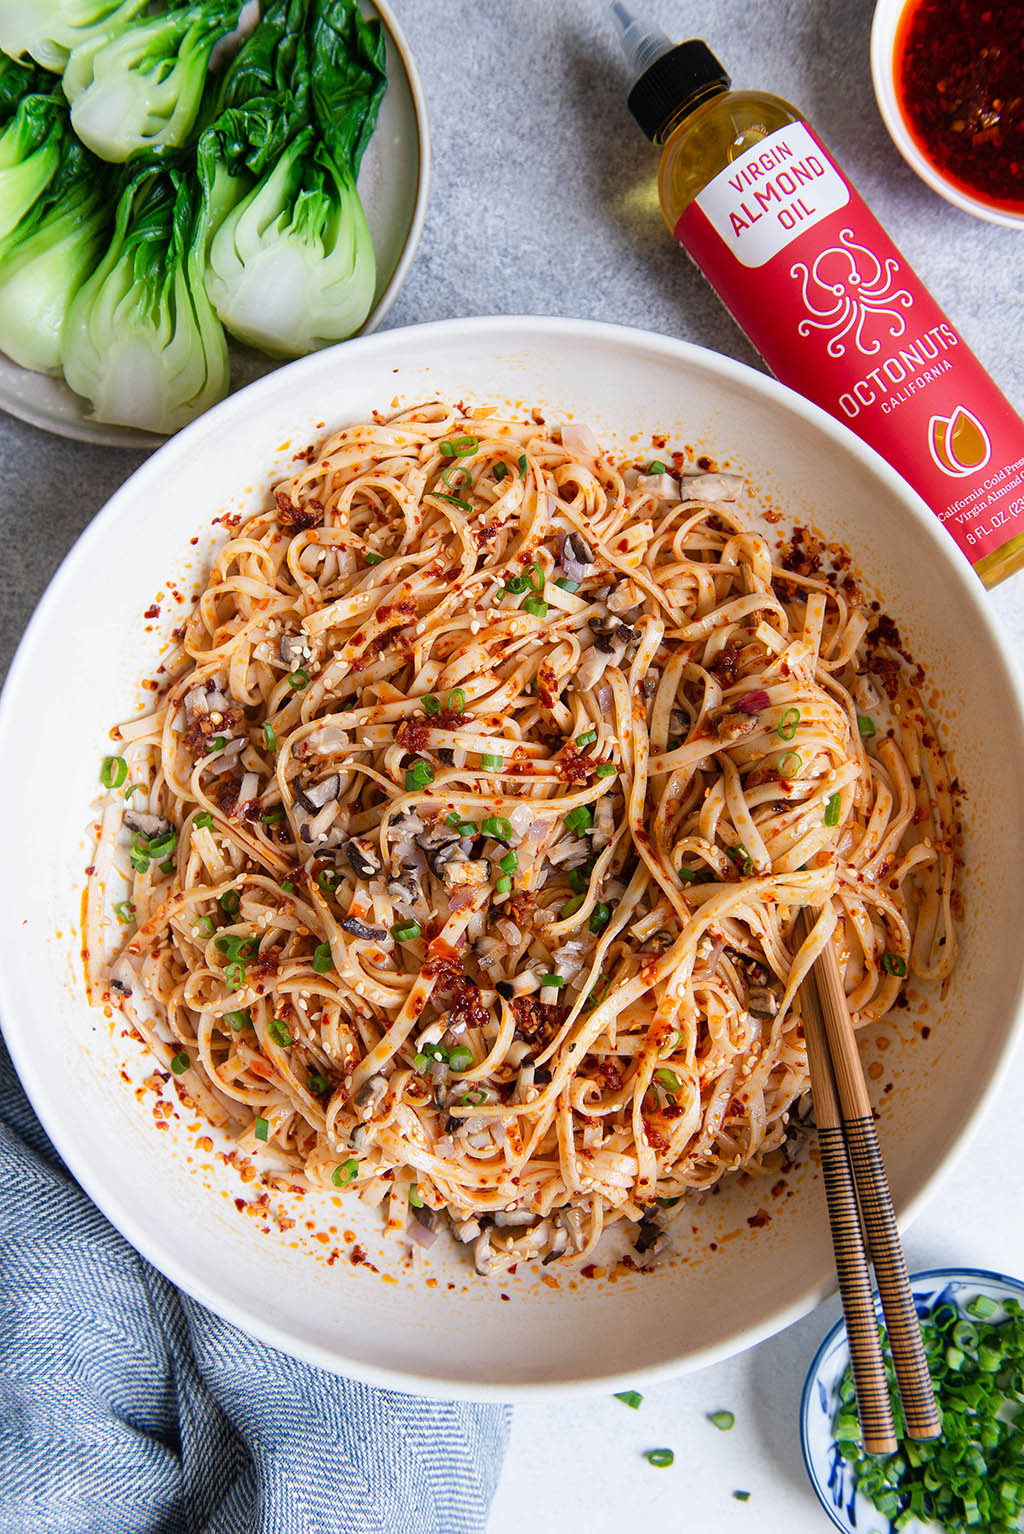 Octonuts Chili Almond Oil Noodles